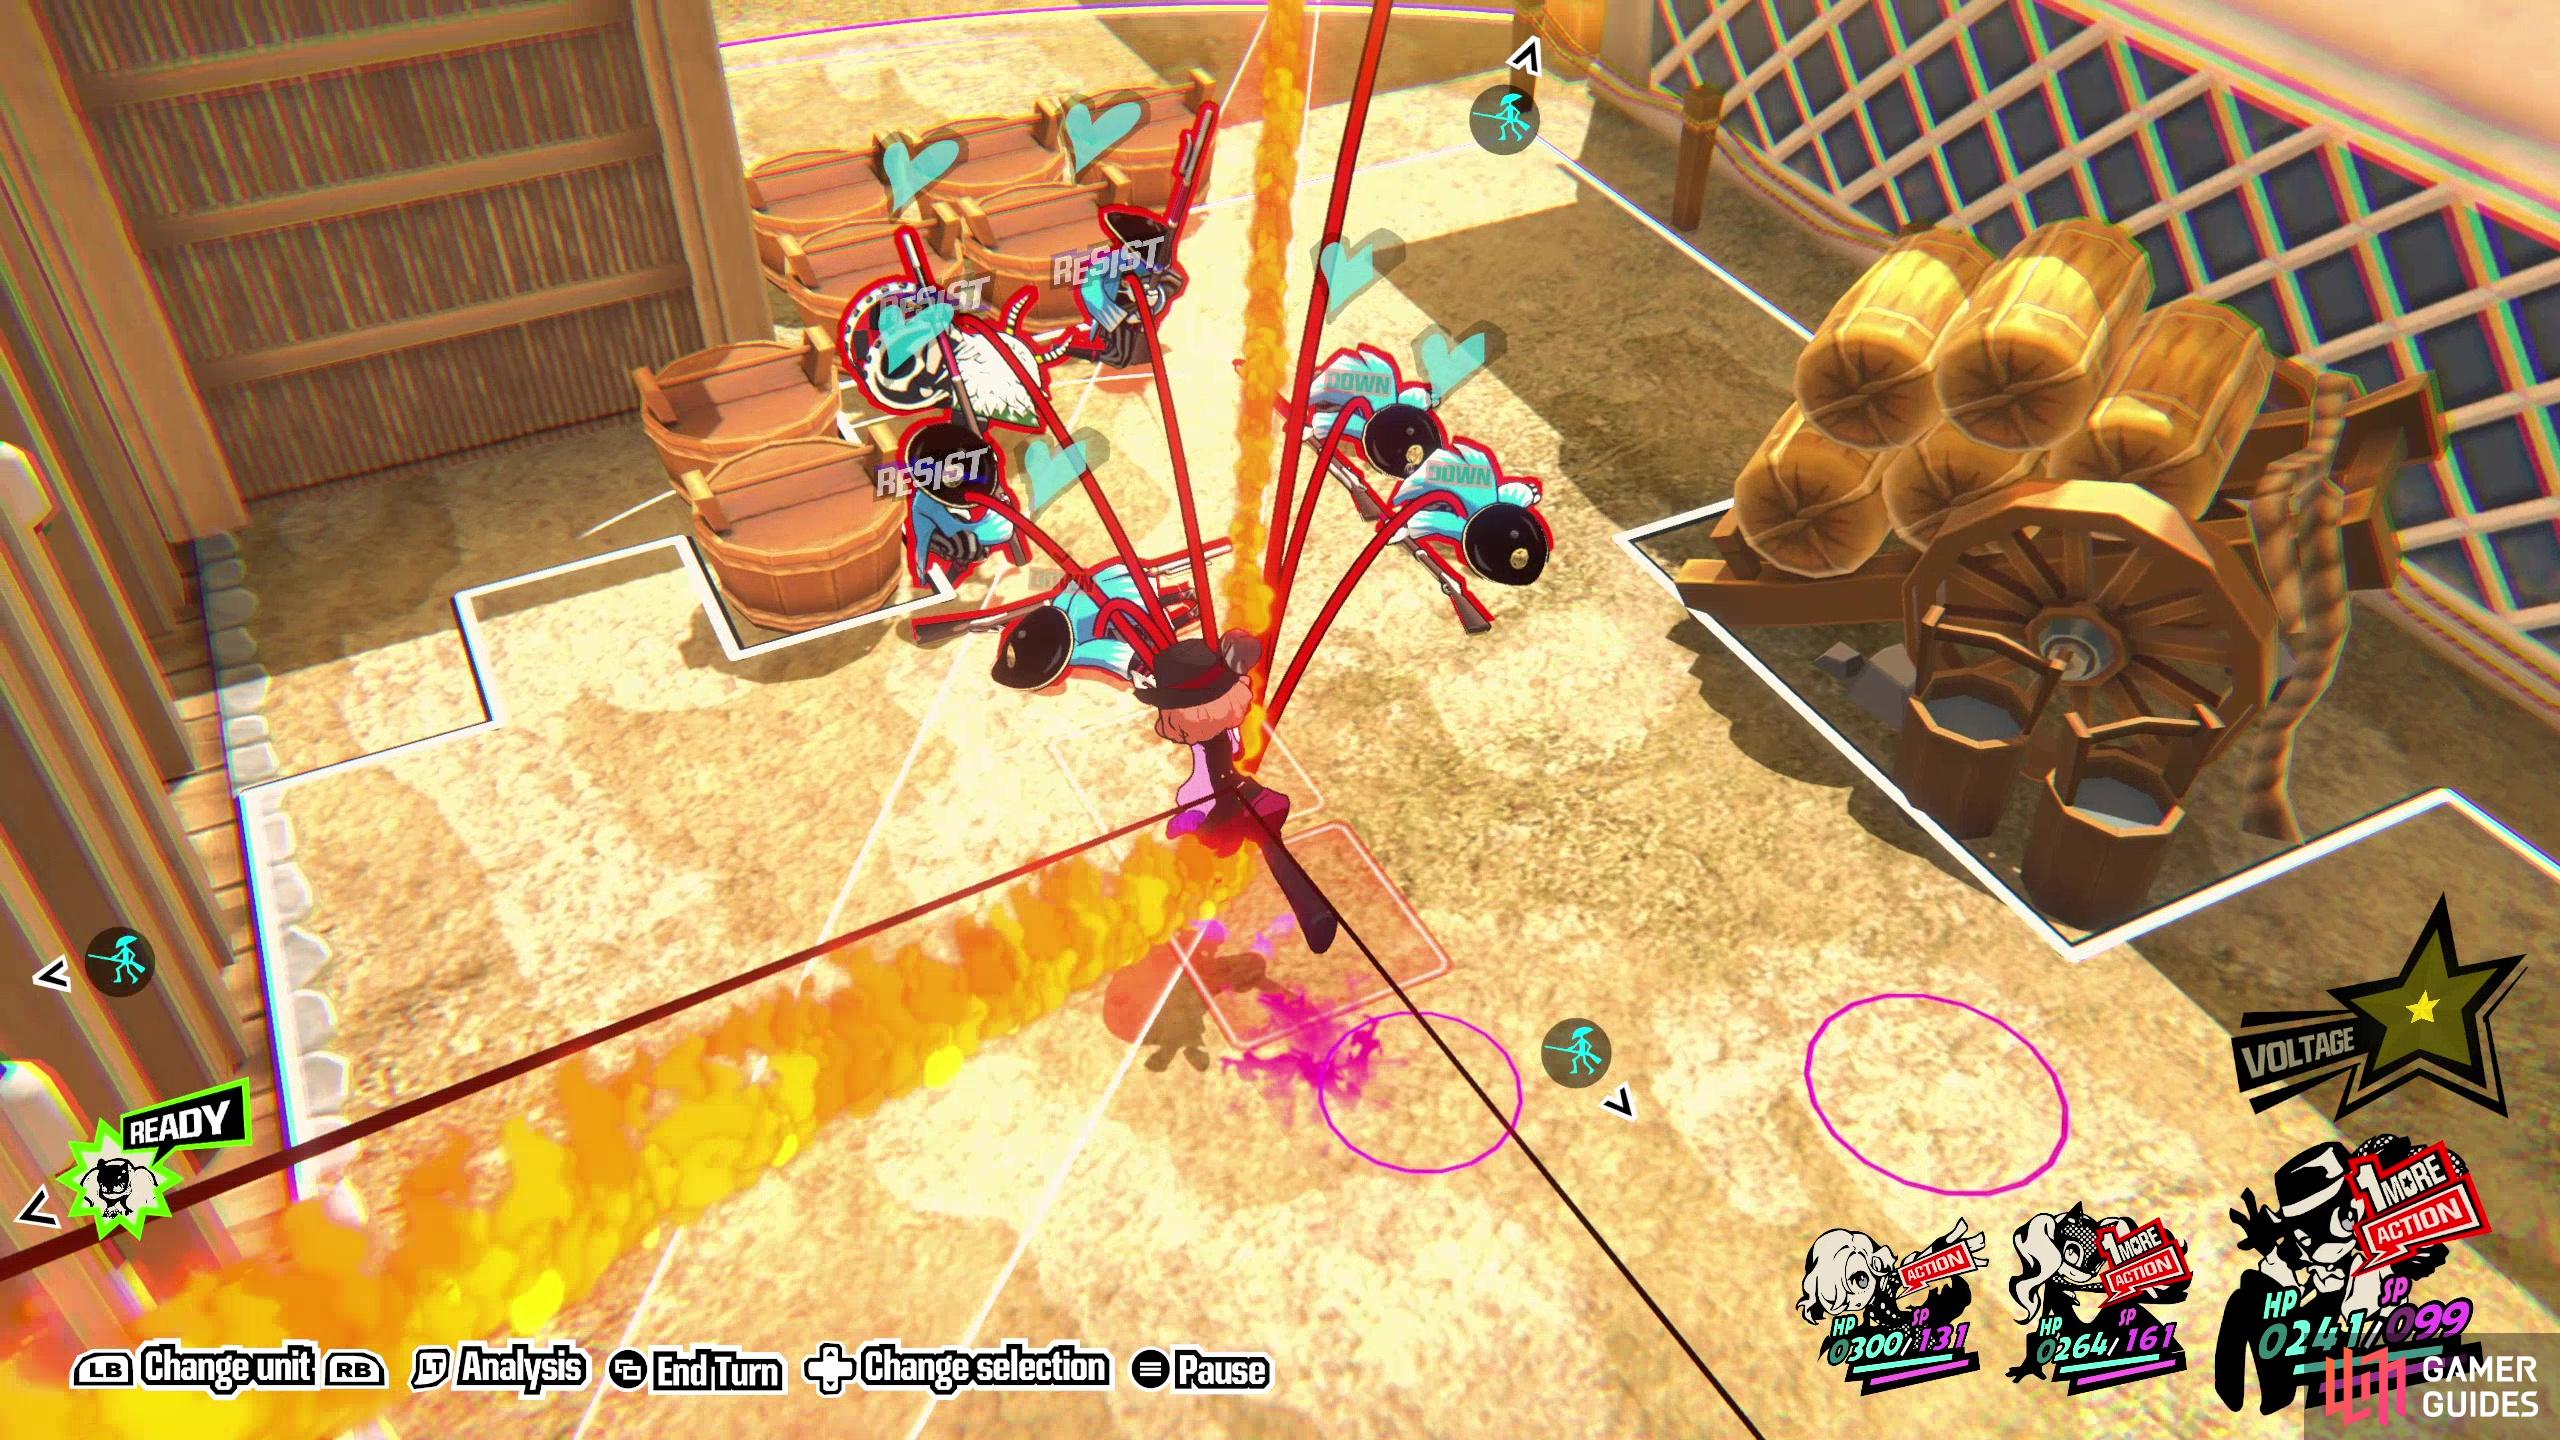 Move Haru towards the enemies clustered on the road so she's ready for a Follow-Up attack,